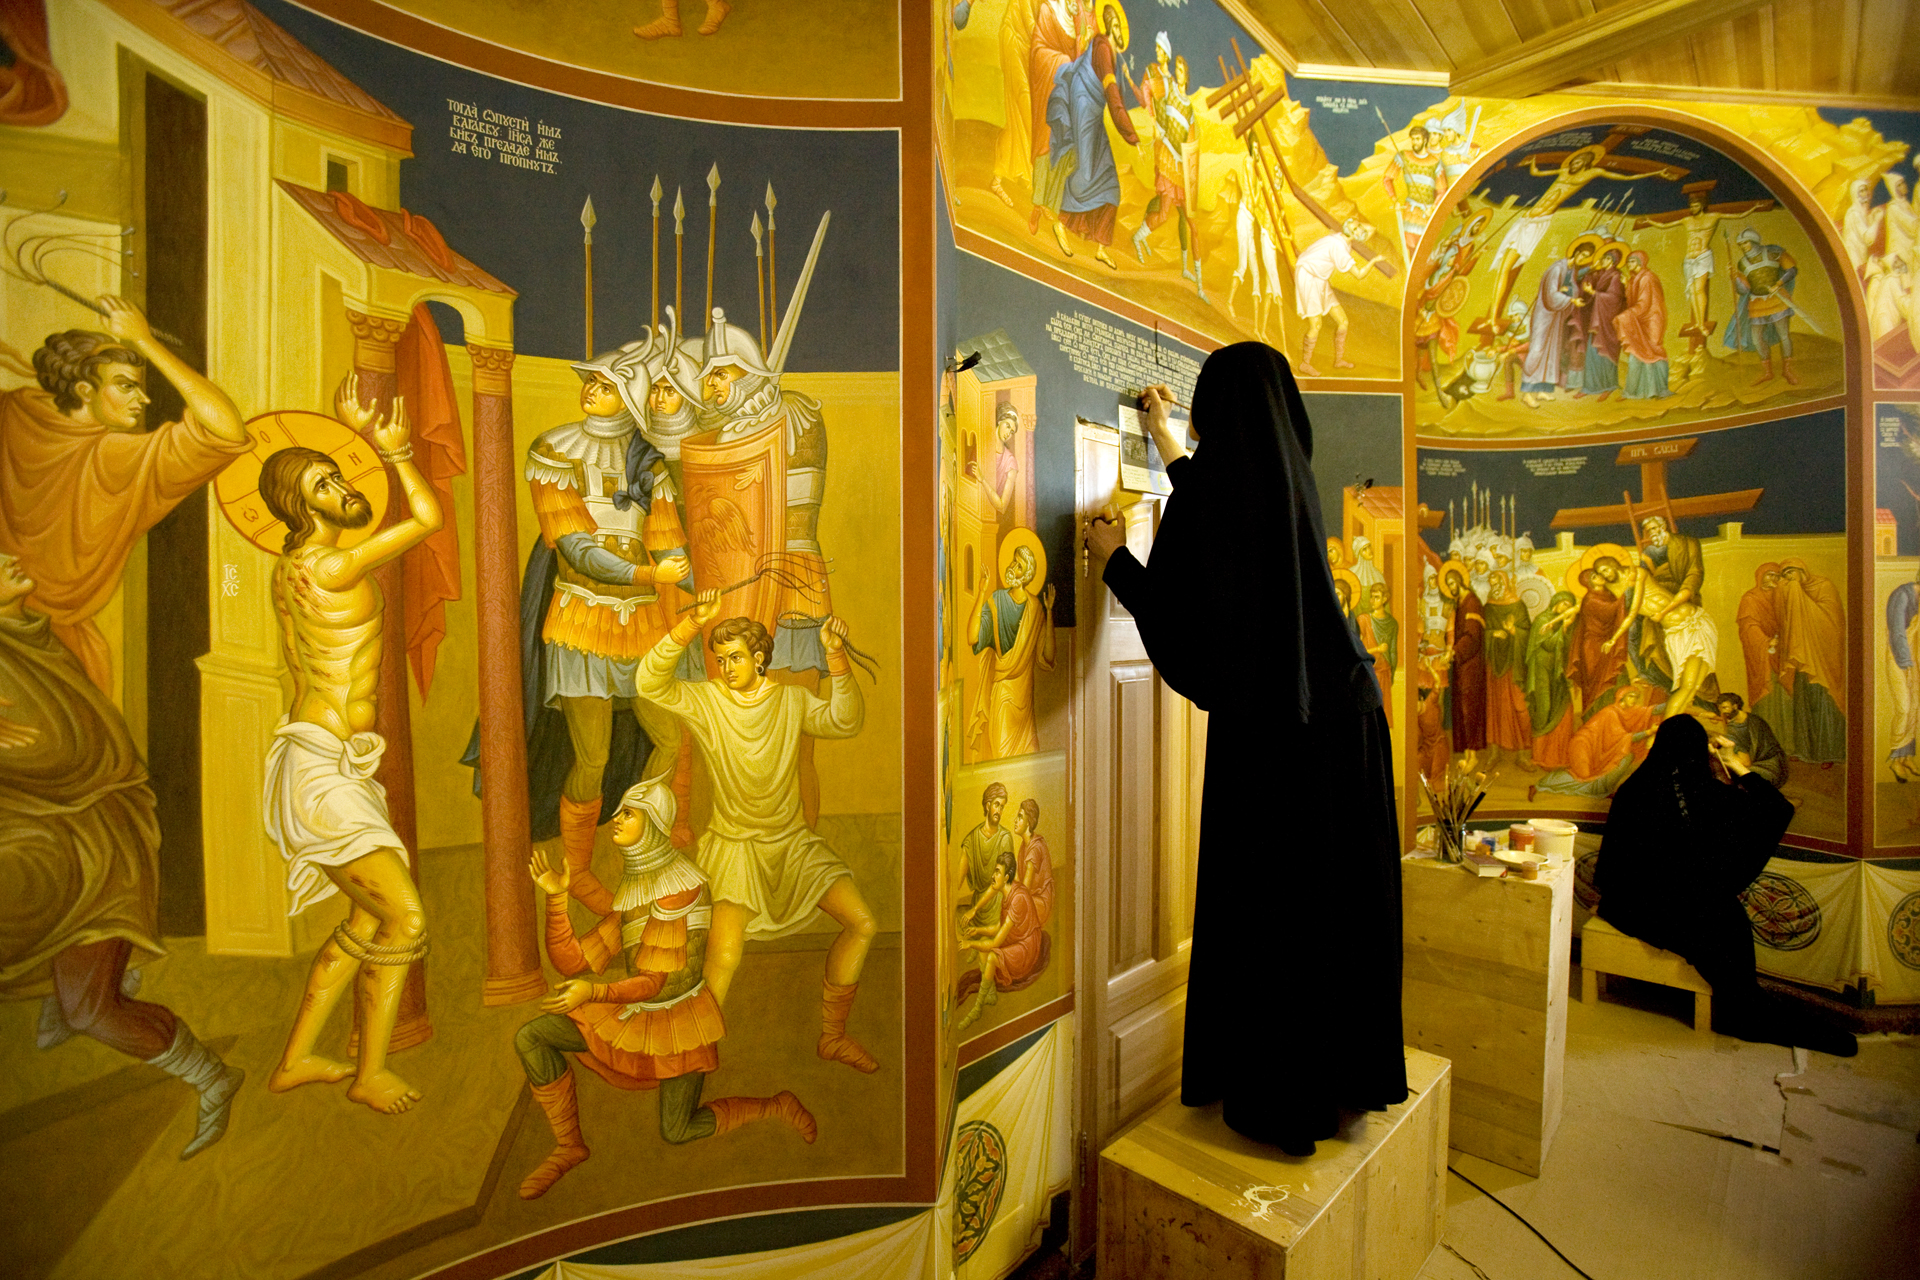  Novo-Tikhvinsky Convent nuns paint walls with religious motifs in a cloister complex that will serve as their abbot's future residence.  Yekaterinburg, Russia  